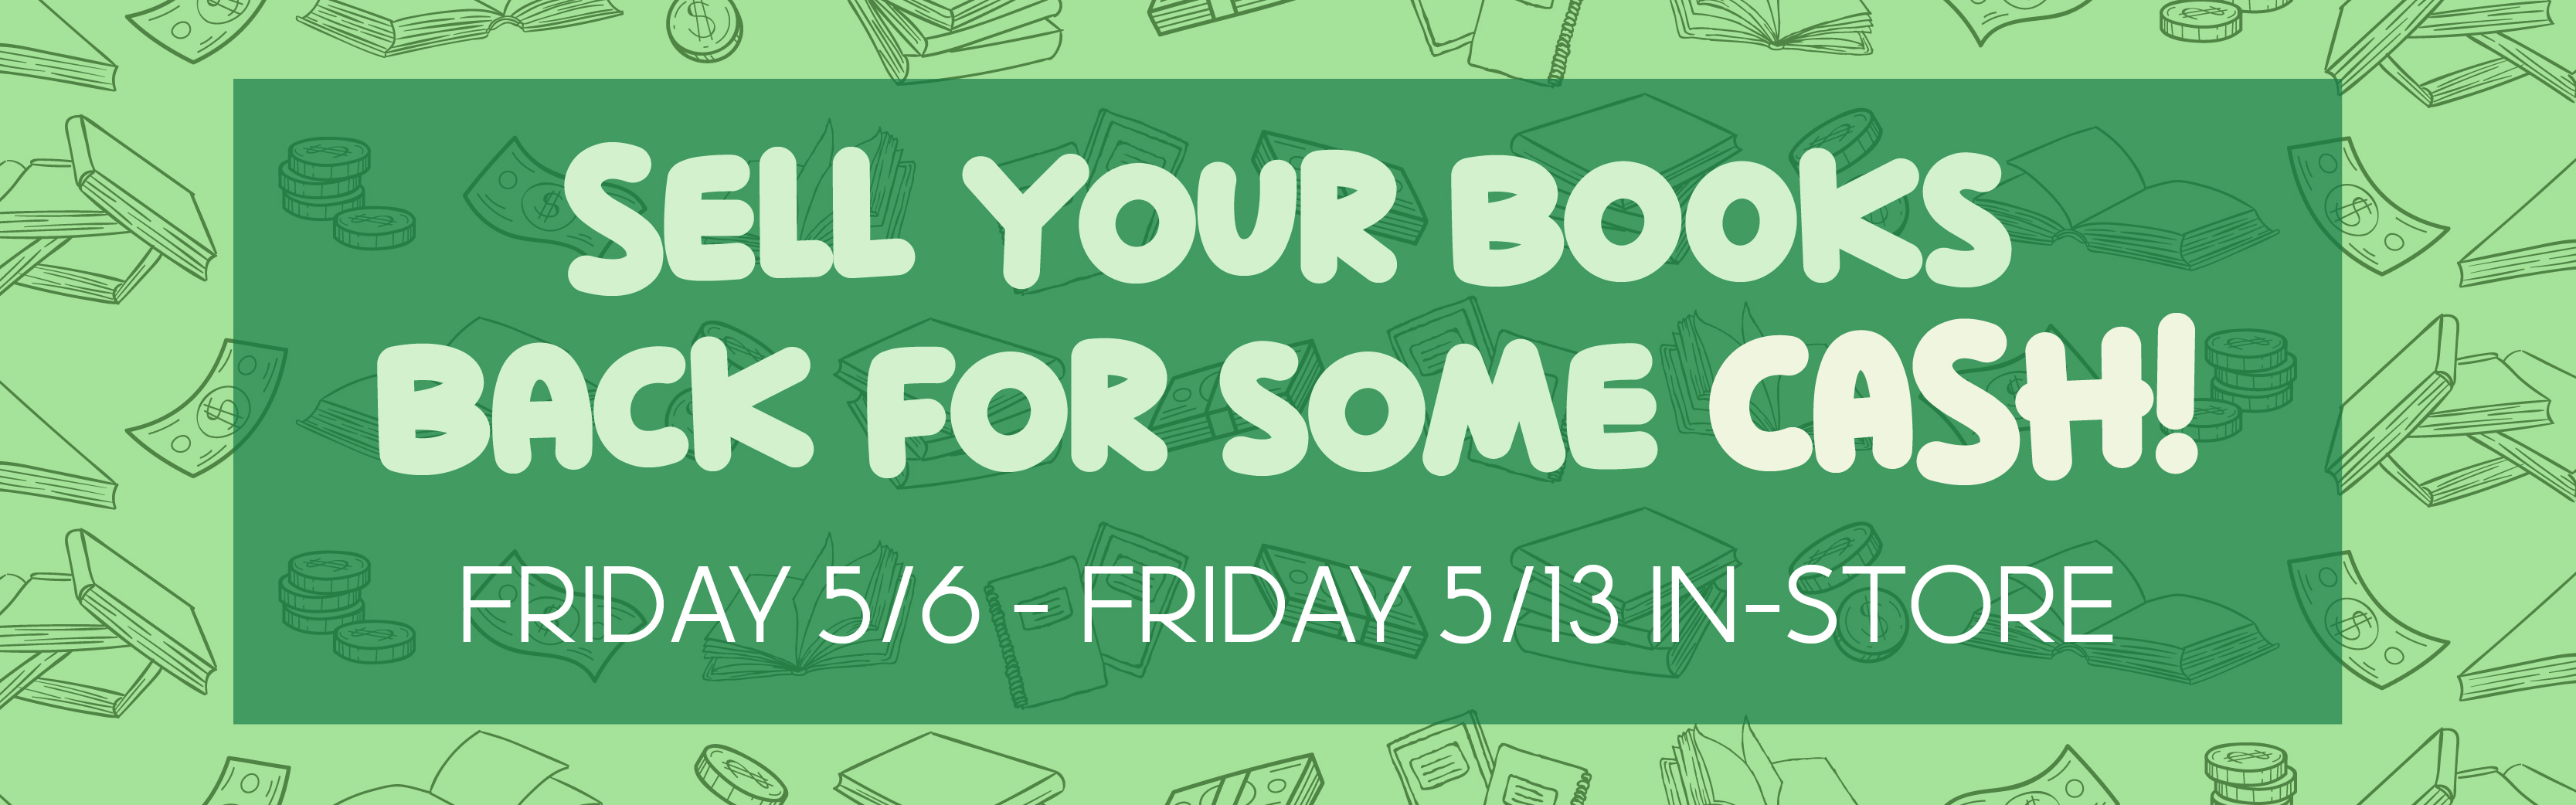 Sell your books back for some CASH in-store Friday, 5/6 through Friday 5/13.